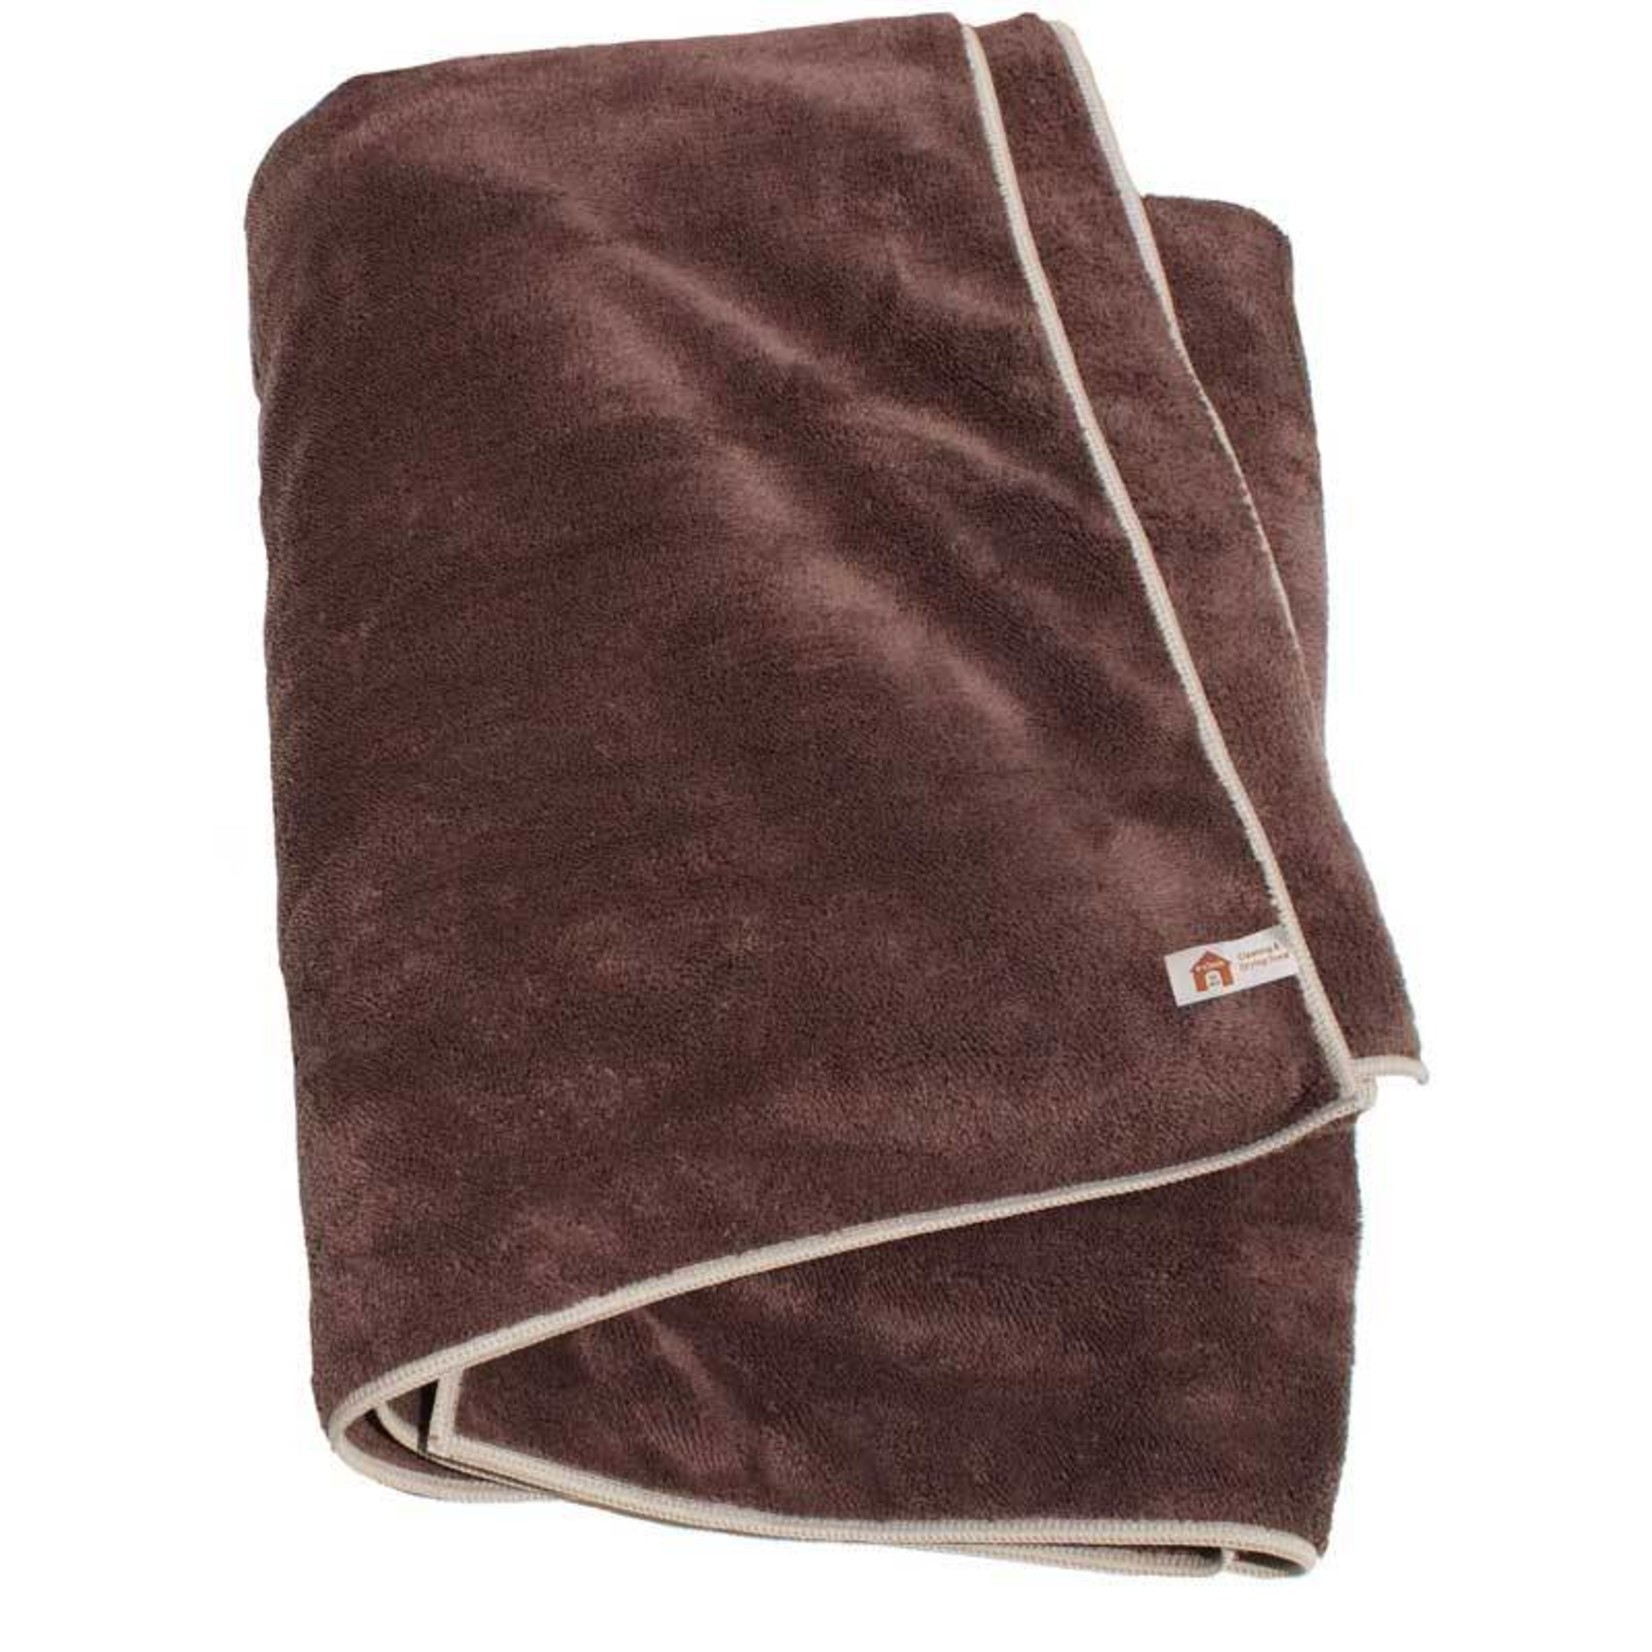 E-Cloth E-Cloth Pet Drying & Cleaning Towel - Large